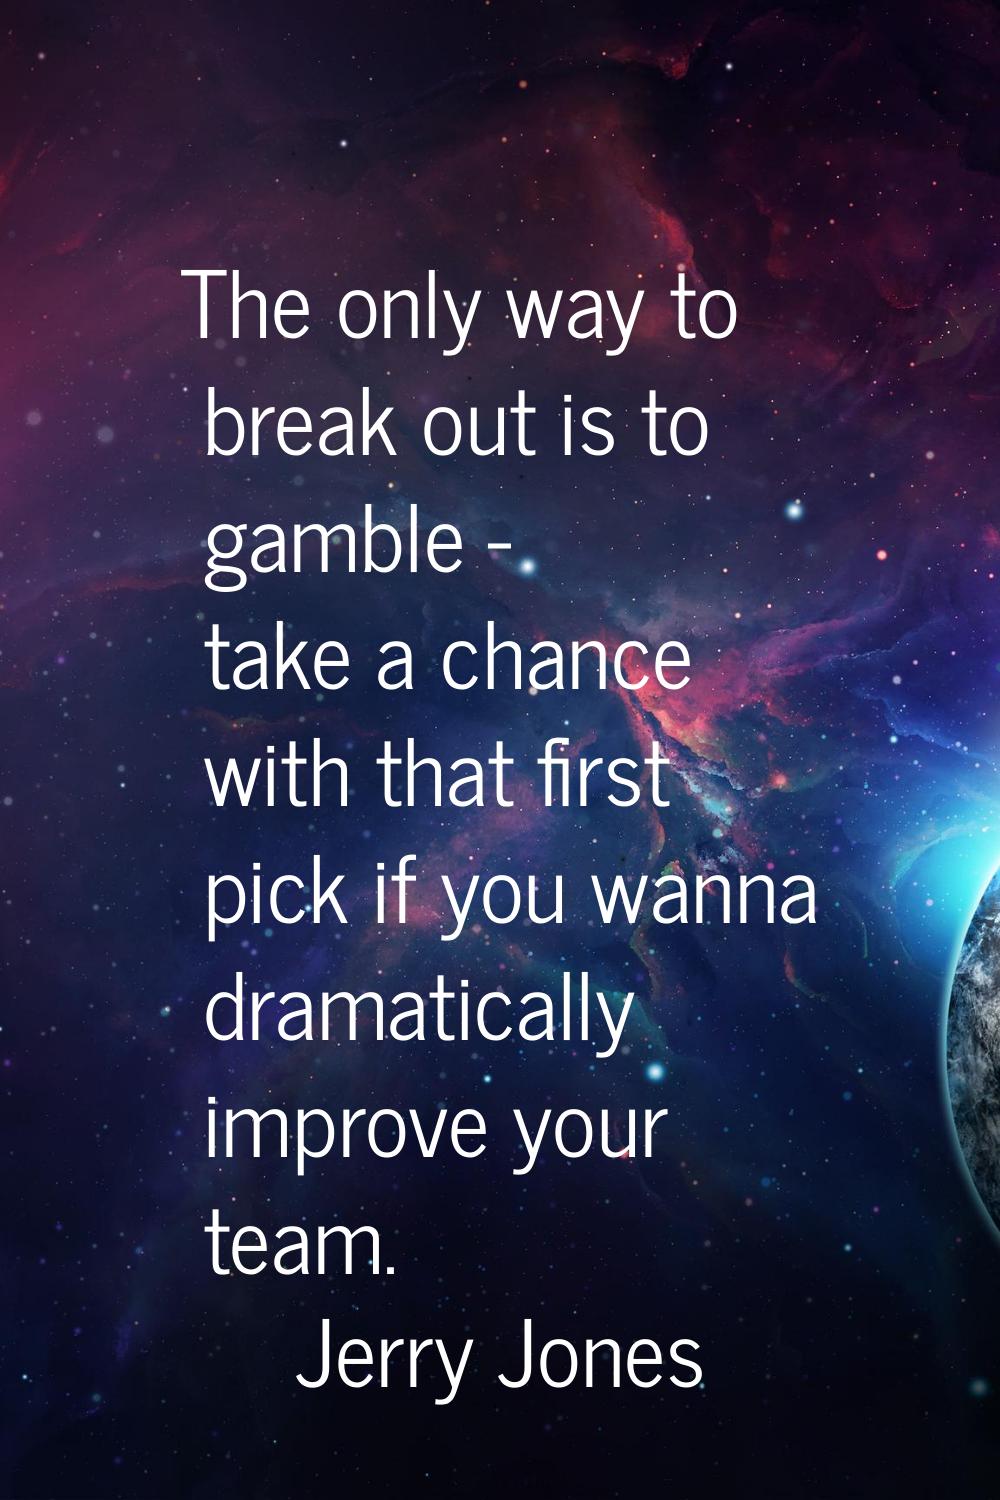 The only way to break out is to gamble - take a chance with that first pick if you wanna dramatical